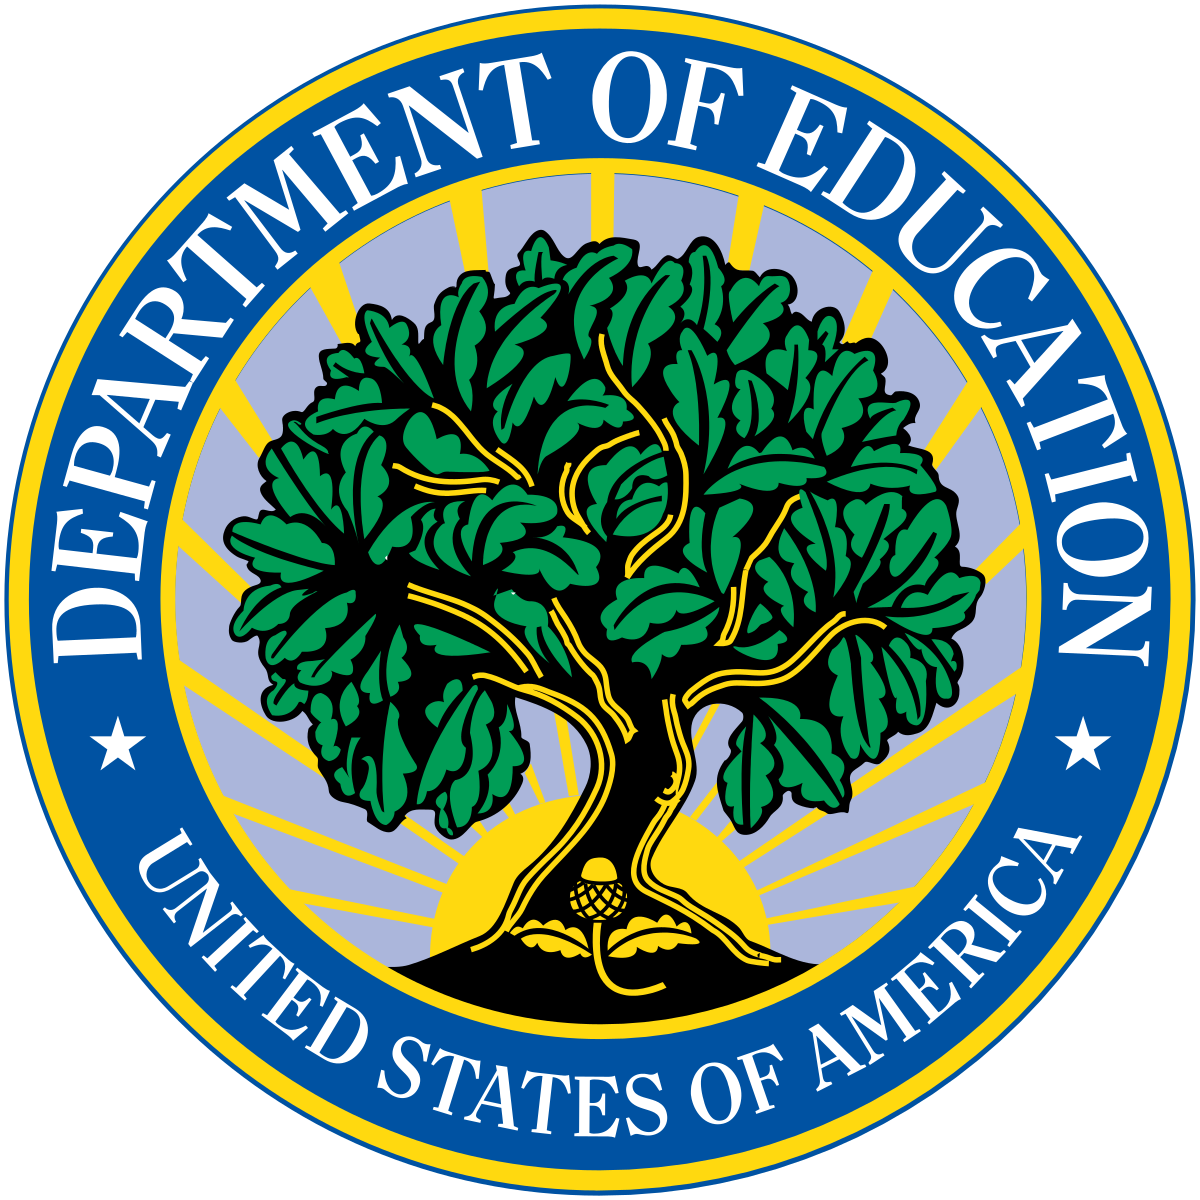 US Department of Education - United States of America